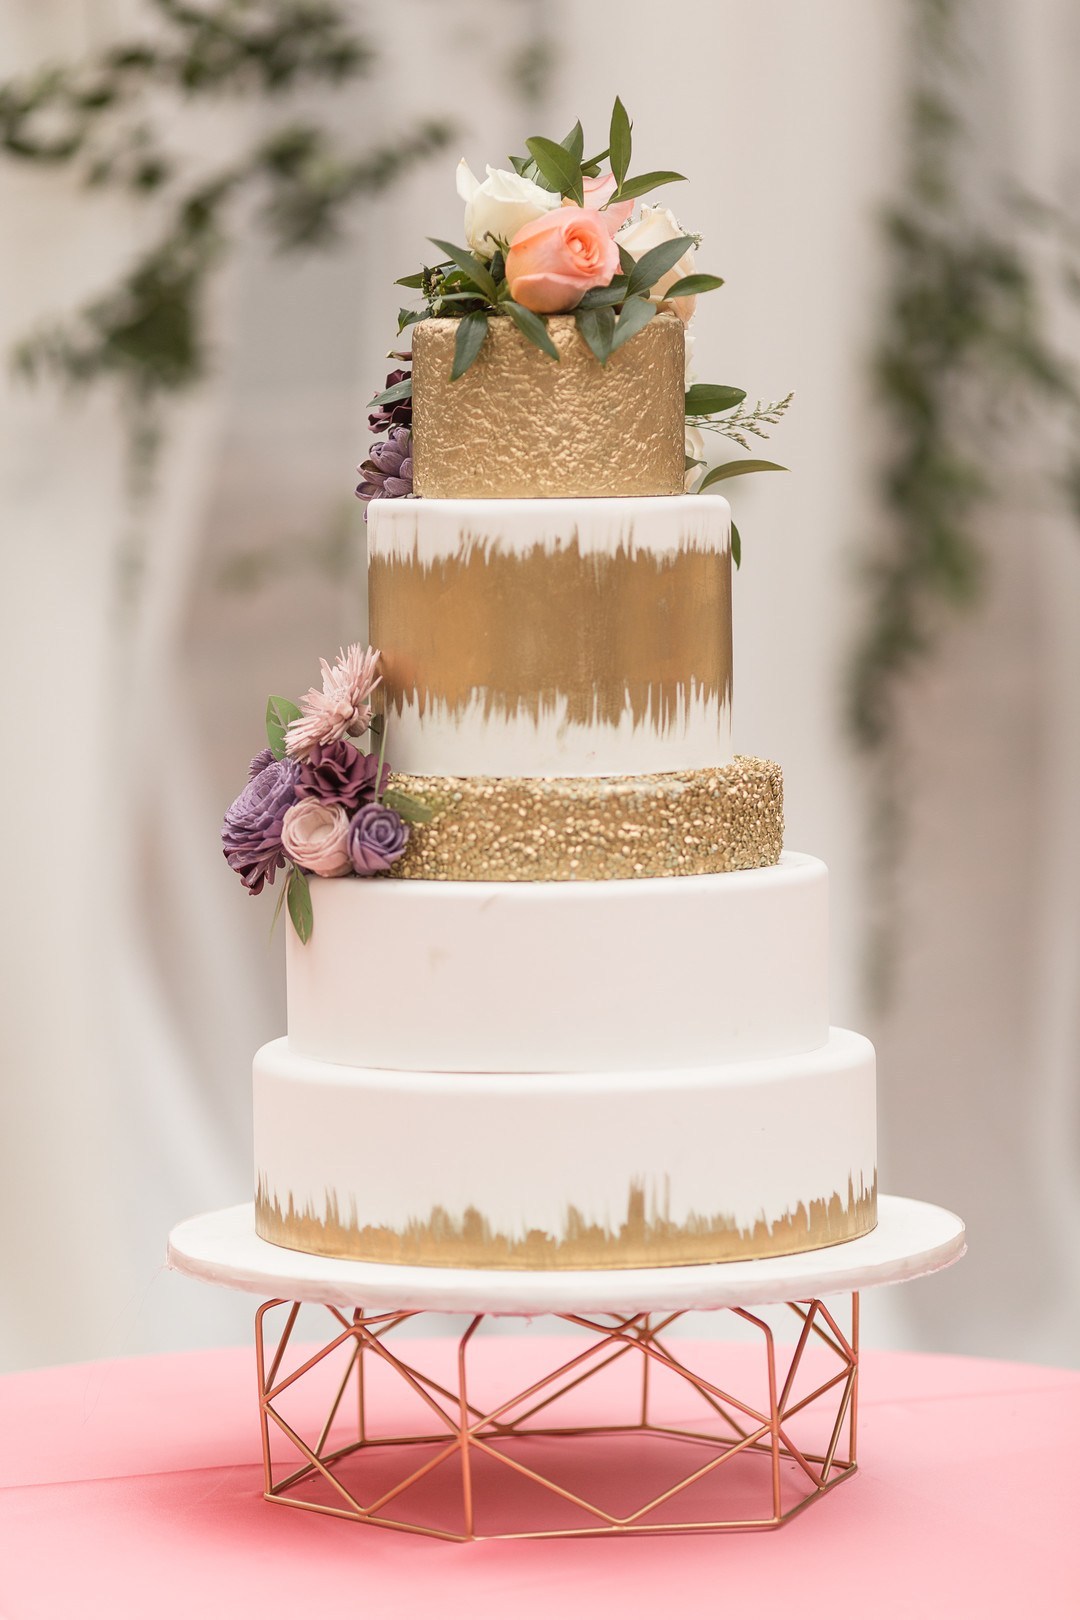 The wedding cake was done in white and gold, topped with fresh blooms and greenery plus a copper stand